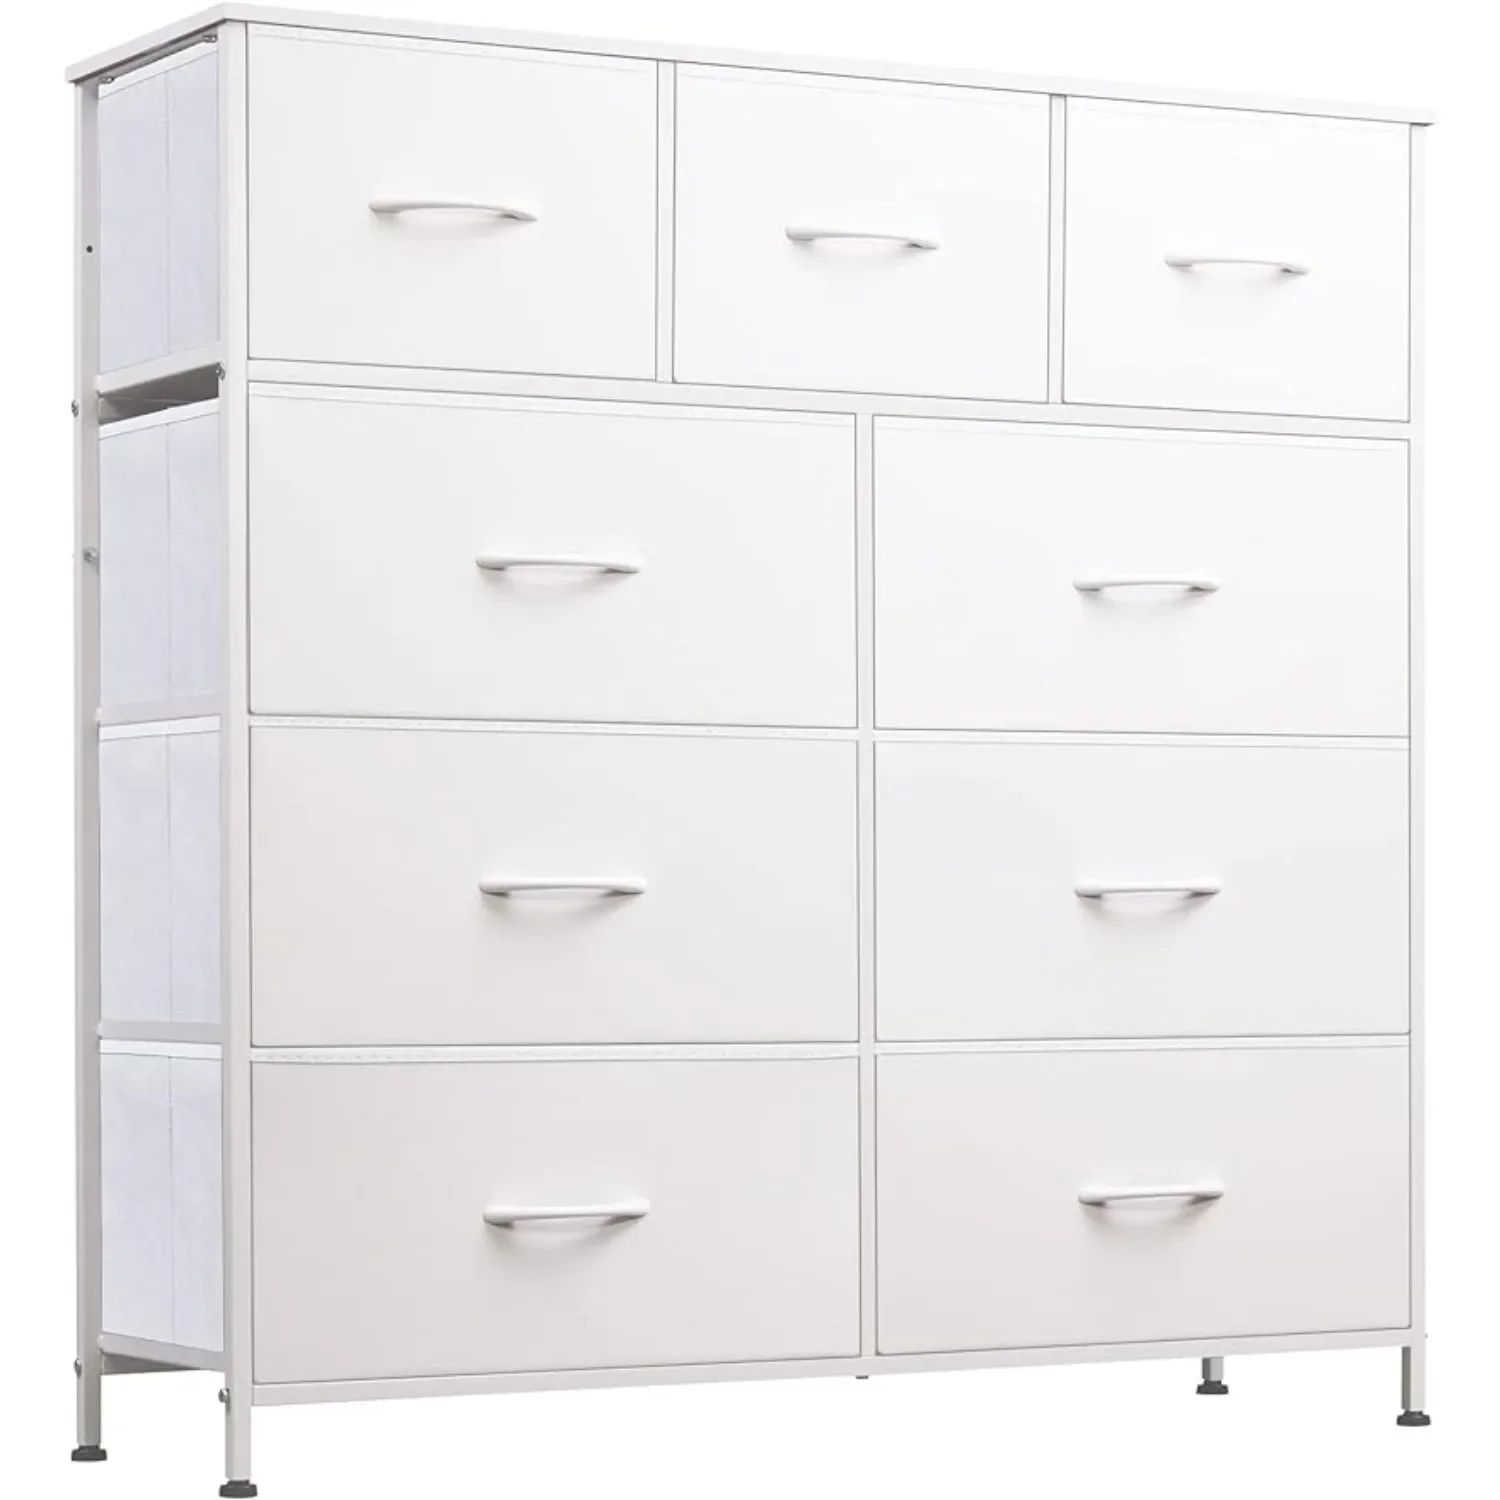 

9-Drawer Dresser, Fabric Storage TowerOrganizer Unit for Bedroom w/ Fabric Bins, Steel Frame, Wood Top, Easy Pull Handle, White